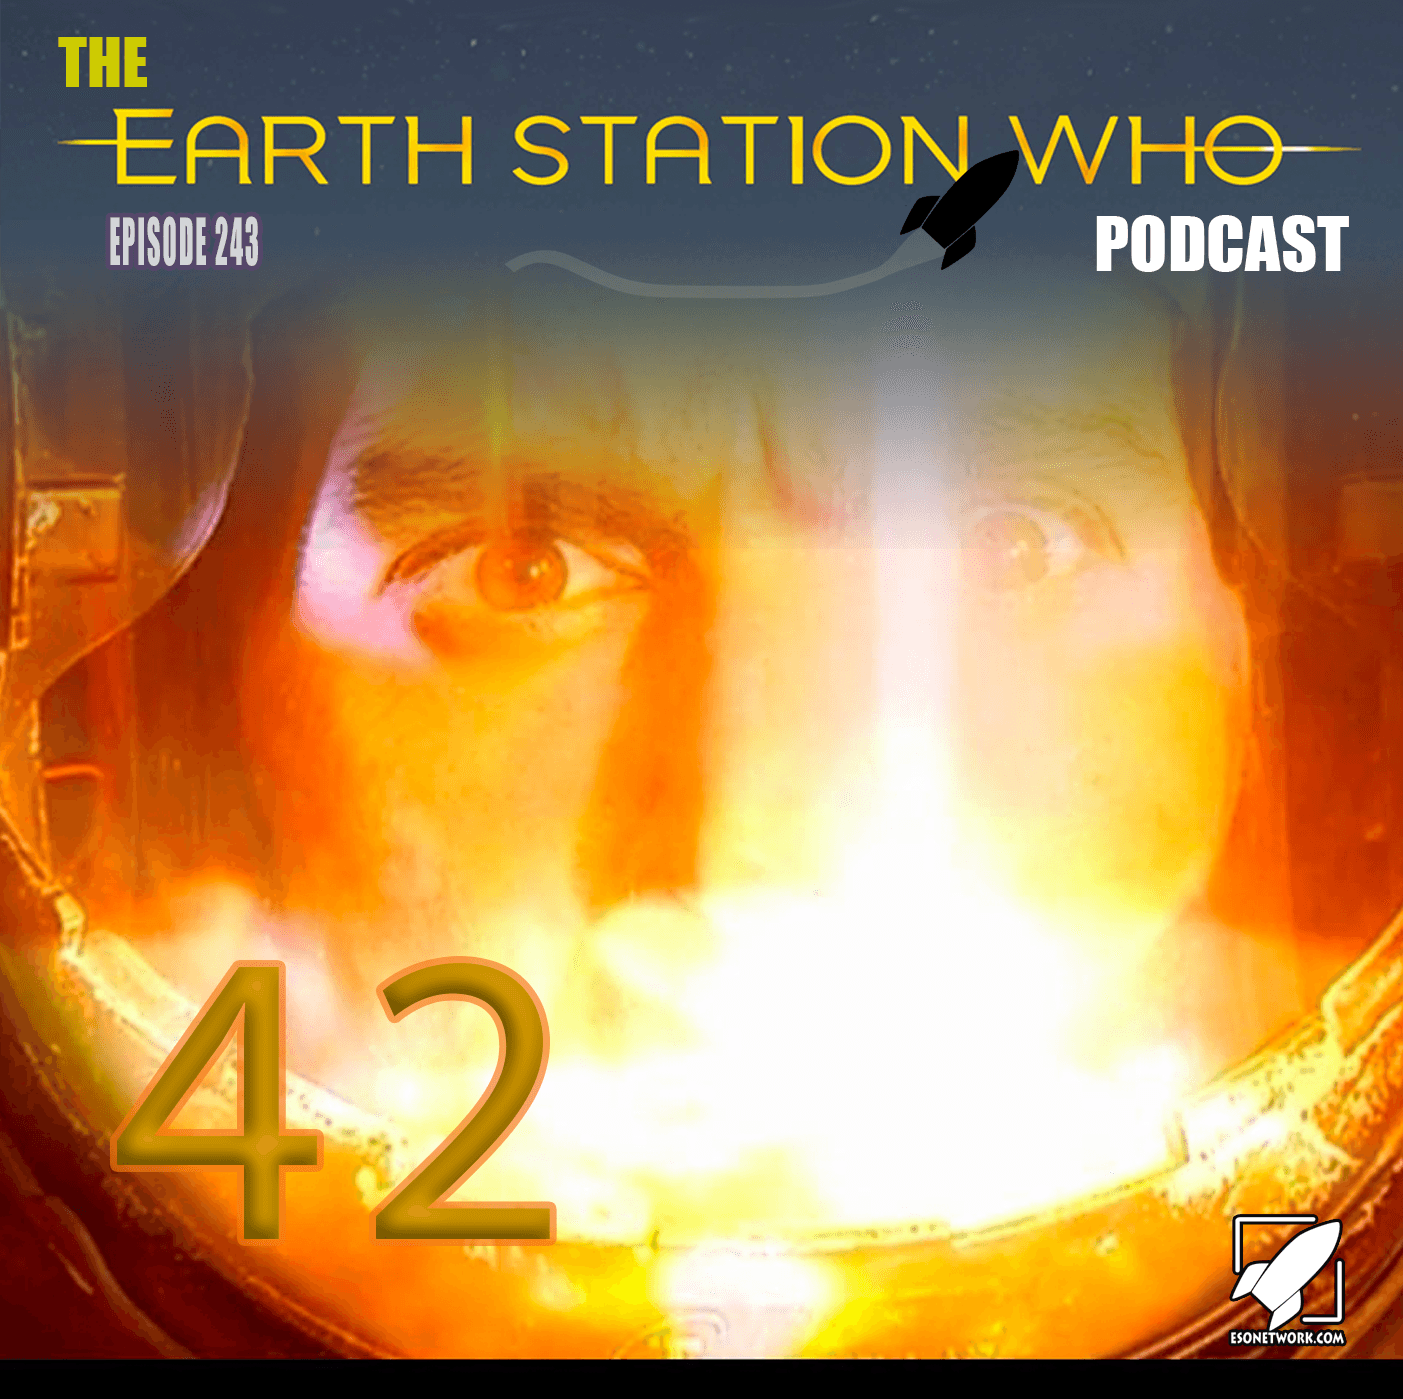 The Earth Station Who Podcast Ep 243